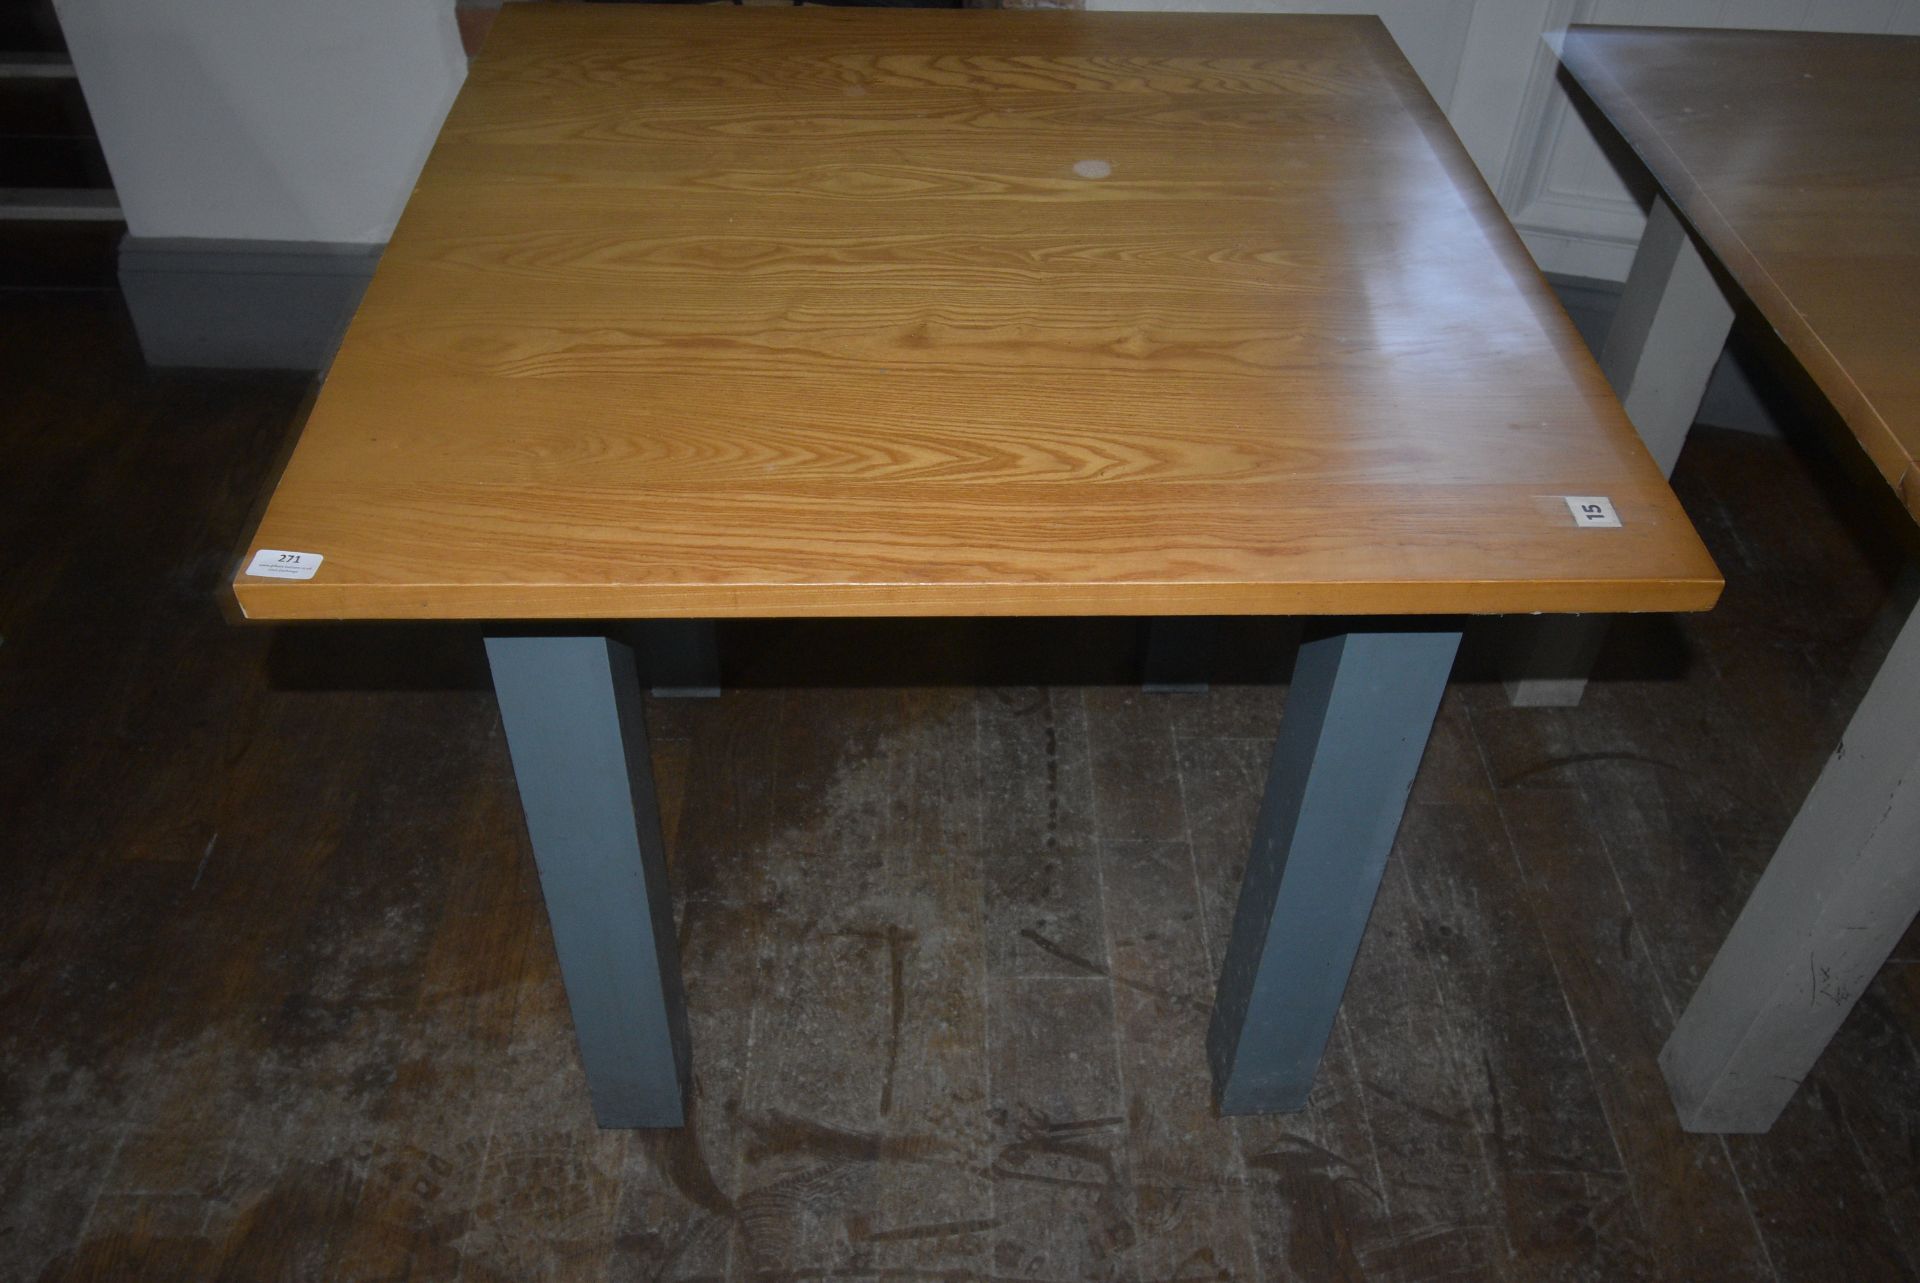 *Square Oak Topped Dining Table on Painted Base 88x88cm